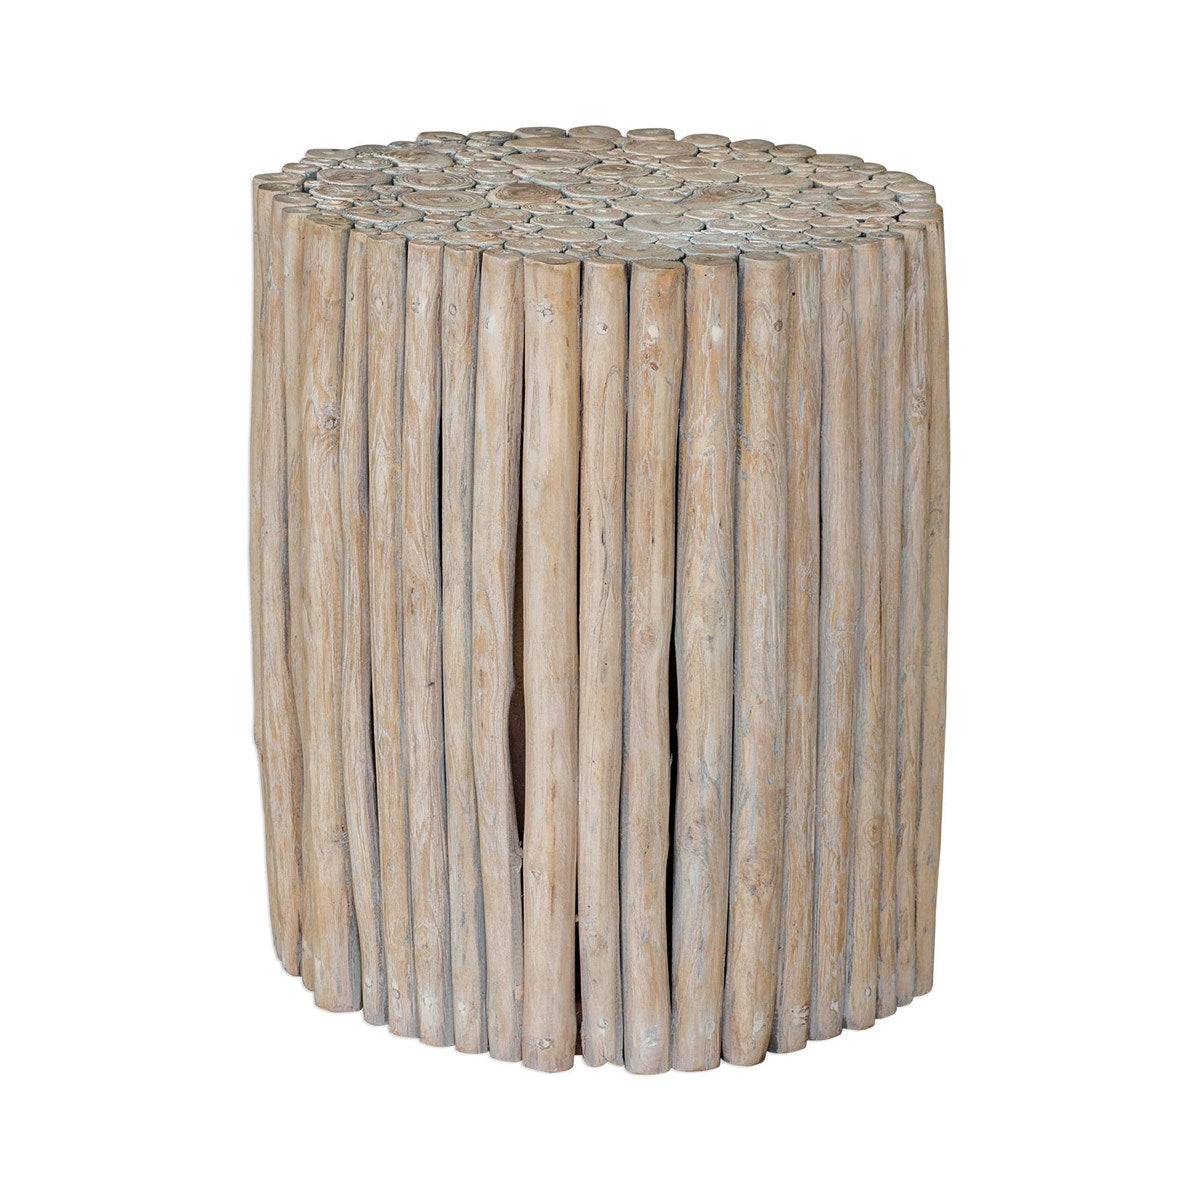 Matteo 24 in. Natural Teak Wood End Table